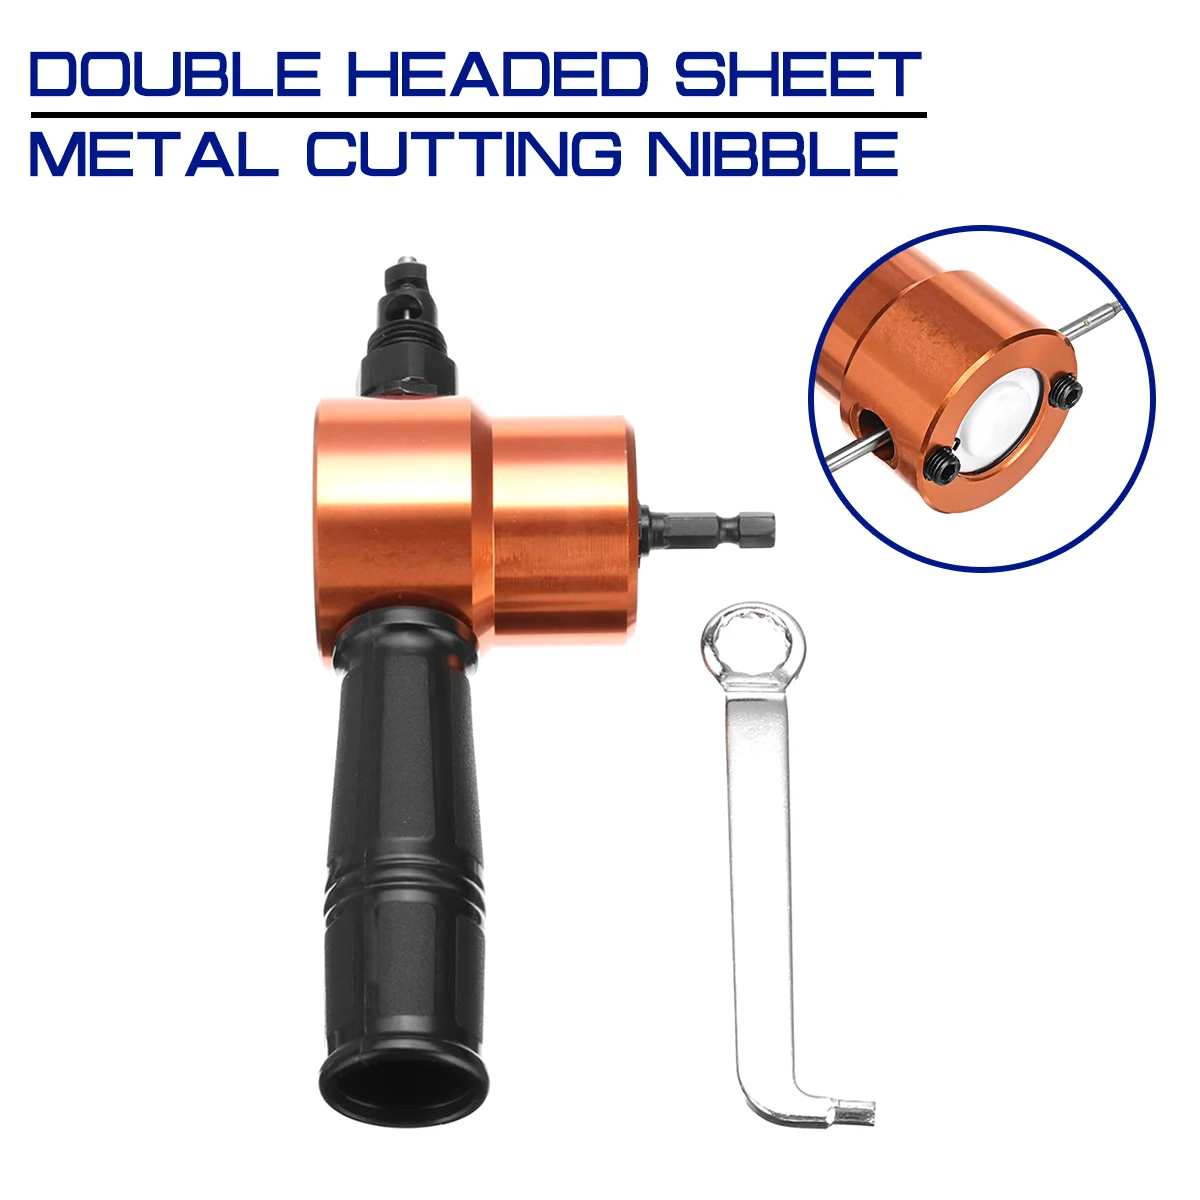 

360 Degree Adjustable Double Headed Sheet Metal Cutting Nibbler Metal Saw Cutter with Extra Punch Cutting Tools Drill Attachment